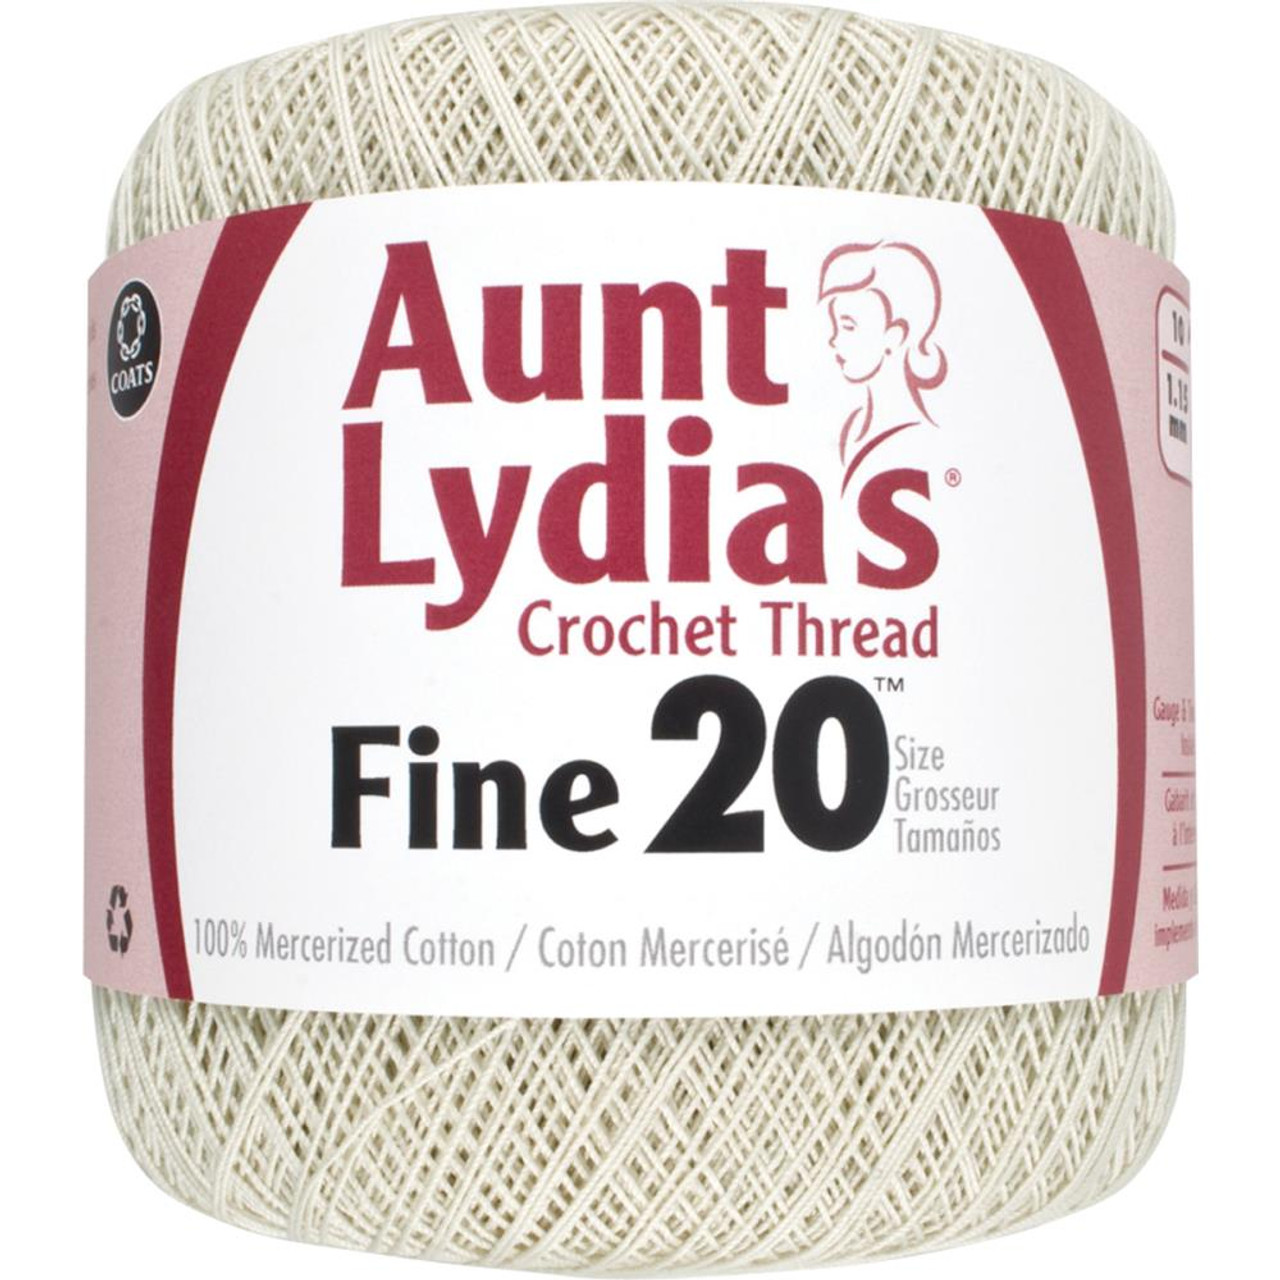 Red Heart Classic Crochet Thread Size 10 White